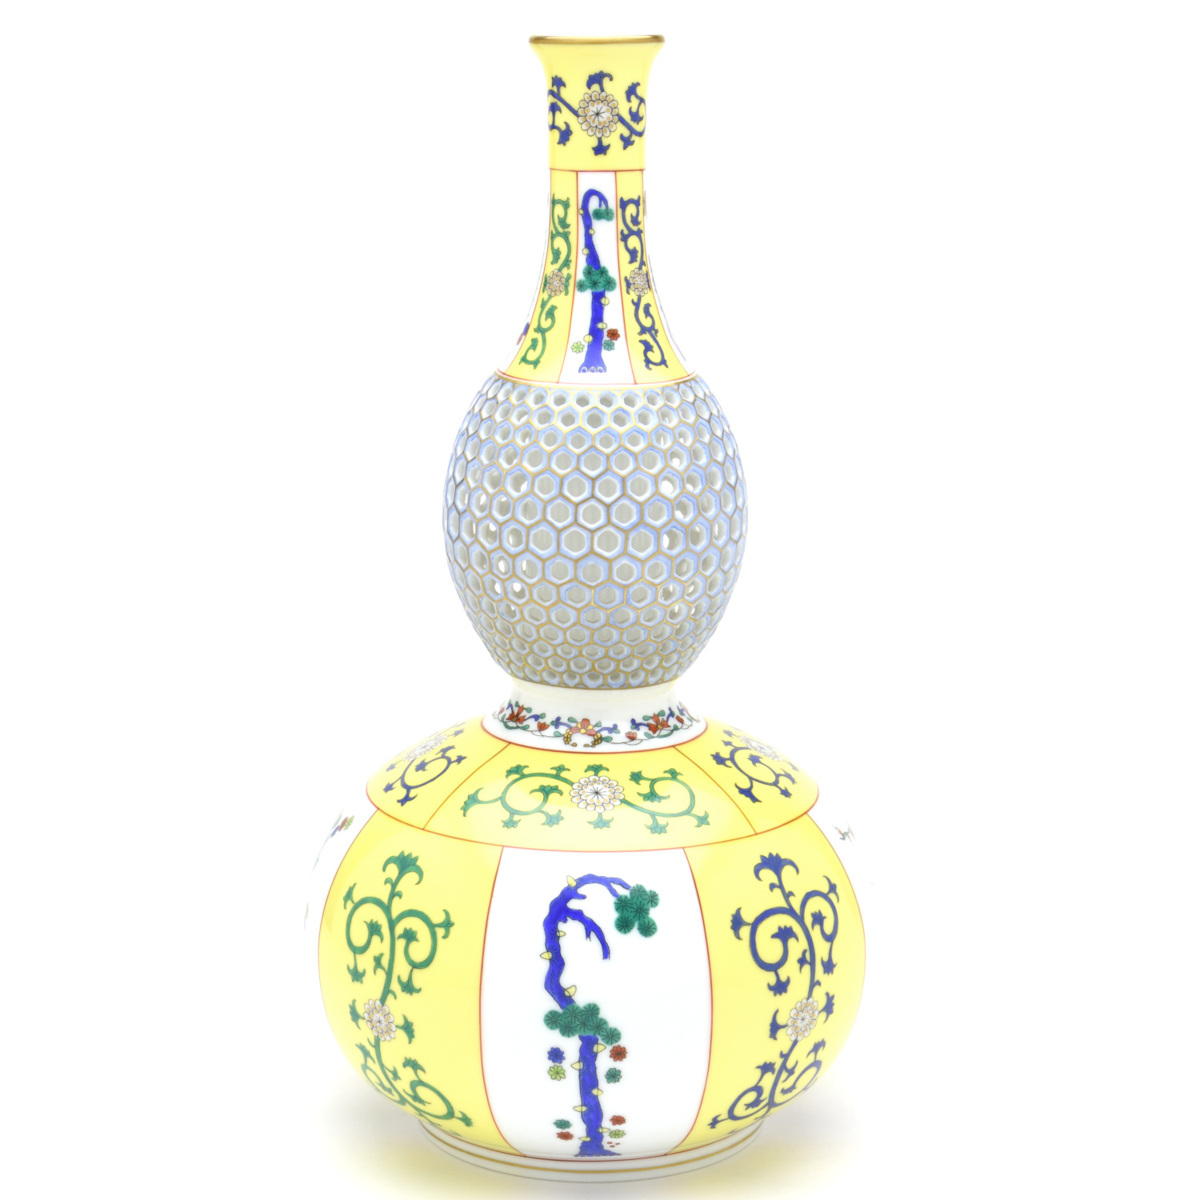 Herend Xi'an Yellow Gourd Shape Vase (L) Openwork Carved Porcelain Decorative Vase Handmade Hand Painted Signed by Master Painter Pine, Chiku, and Plum Pattern New Herend, furniture, interior, interior accessories, vase